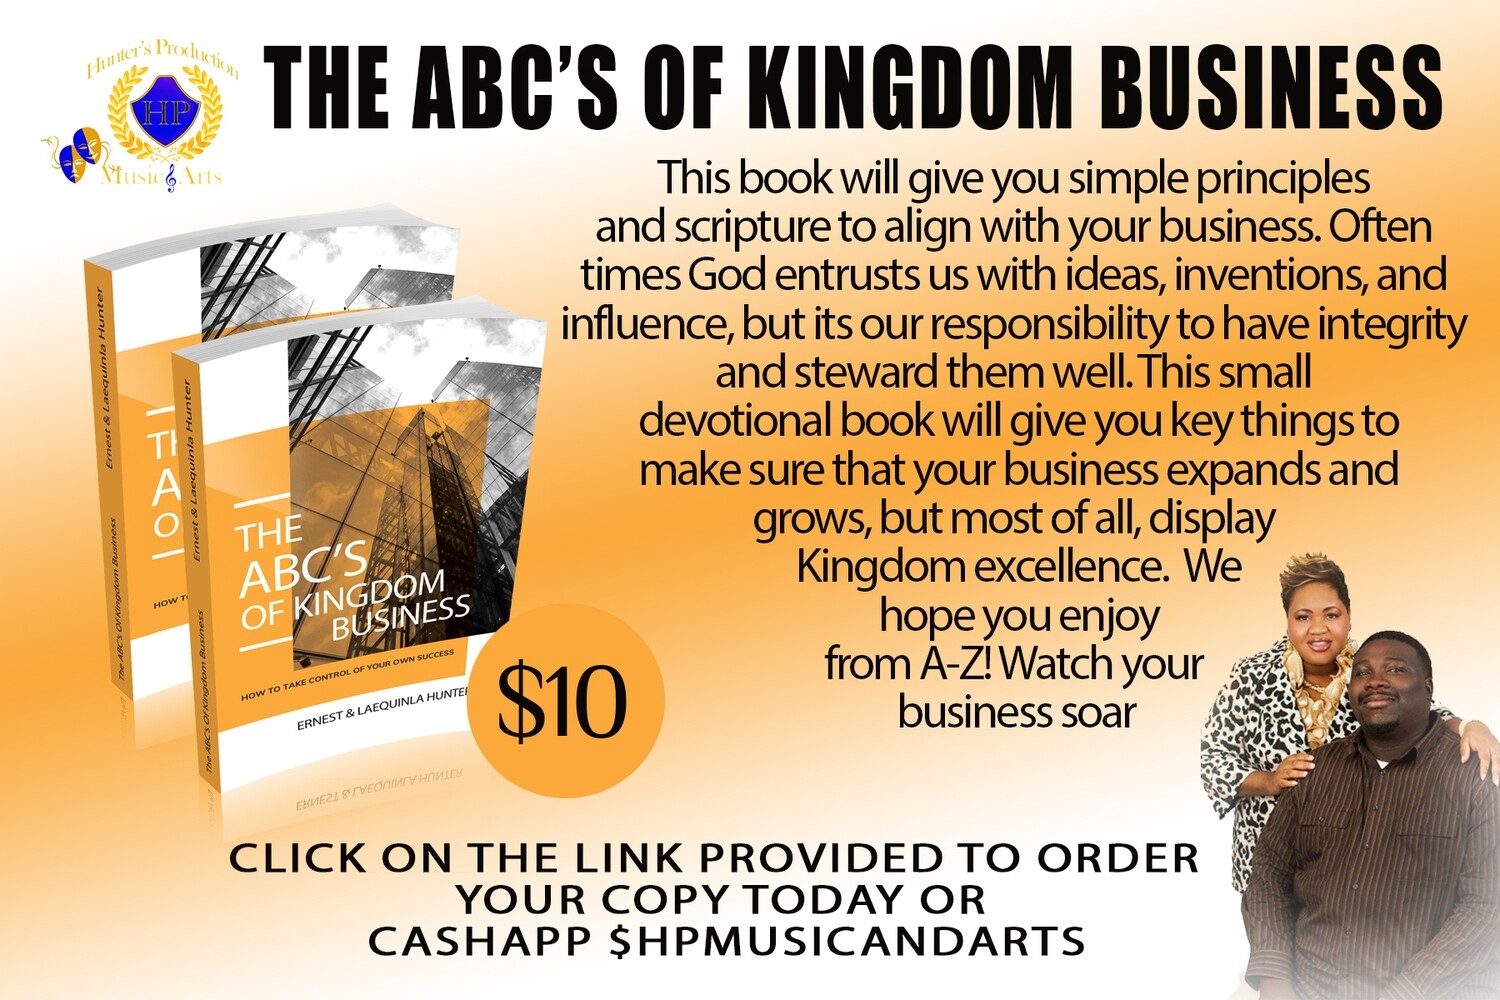 The ABC's of Kingdom Business